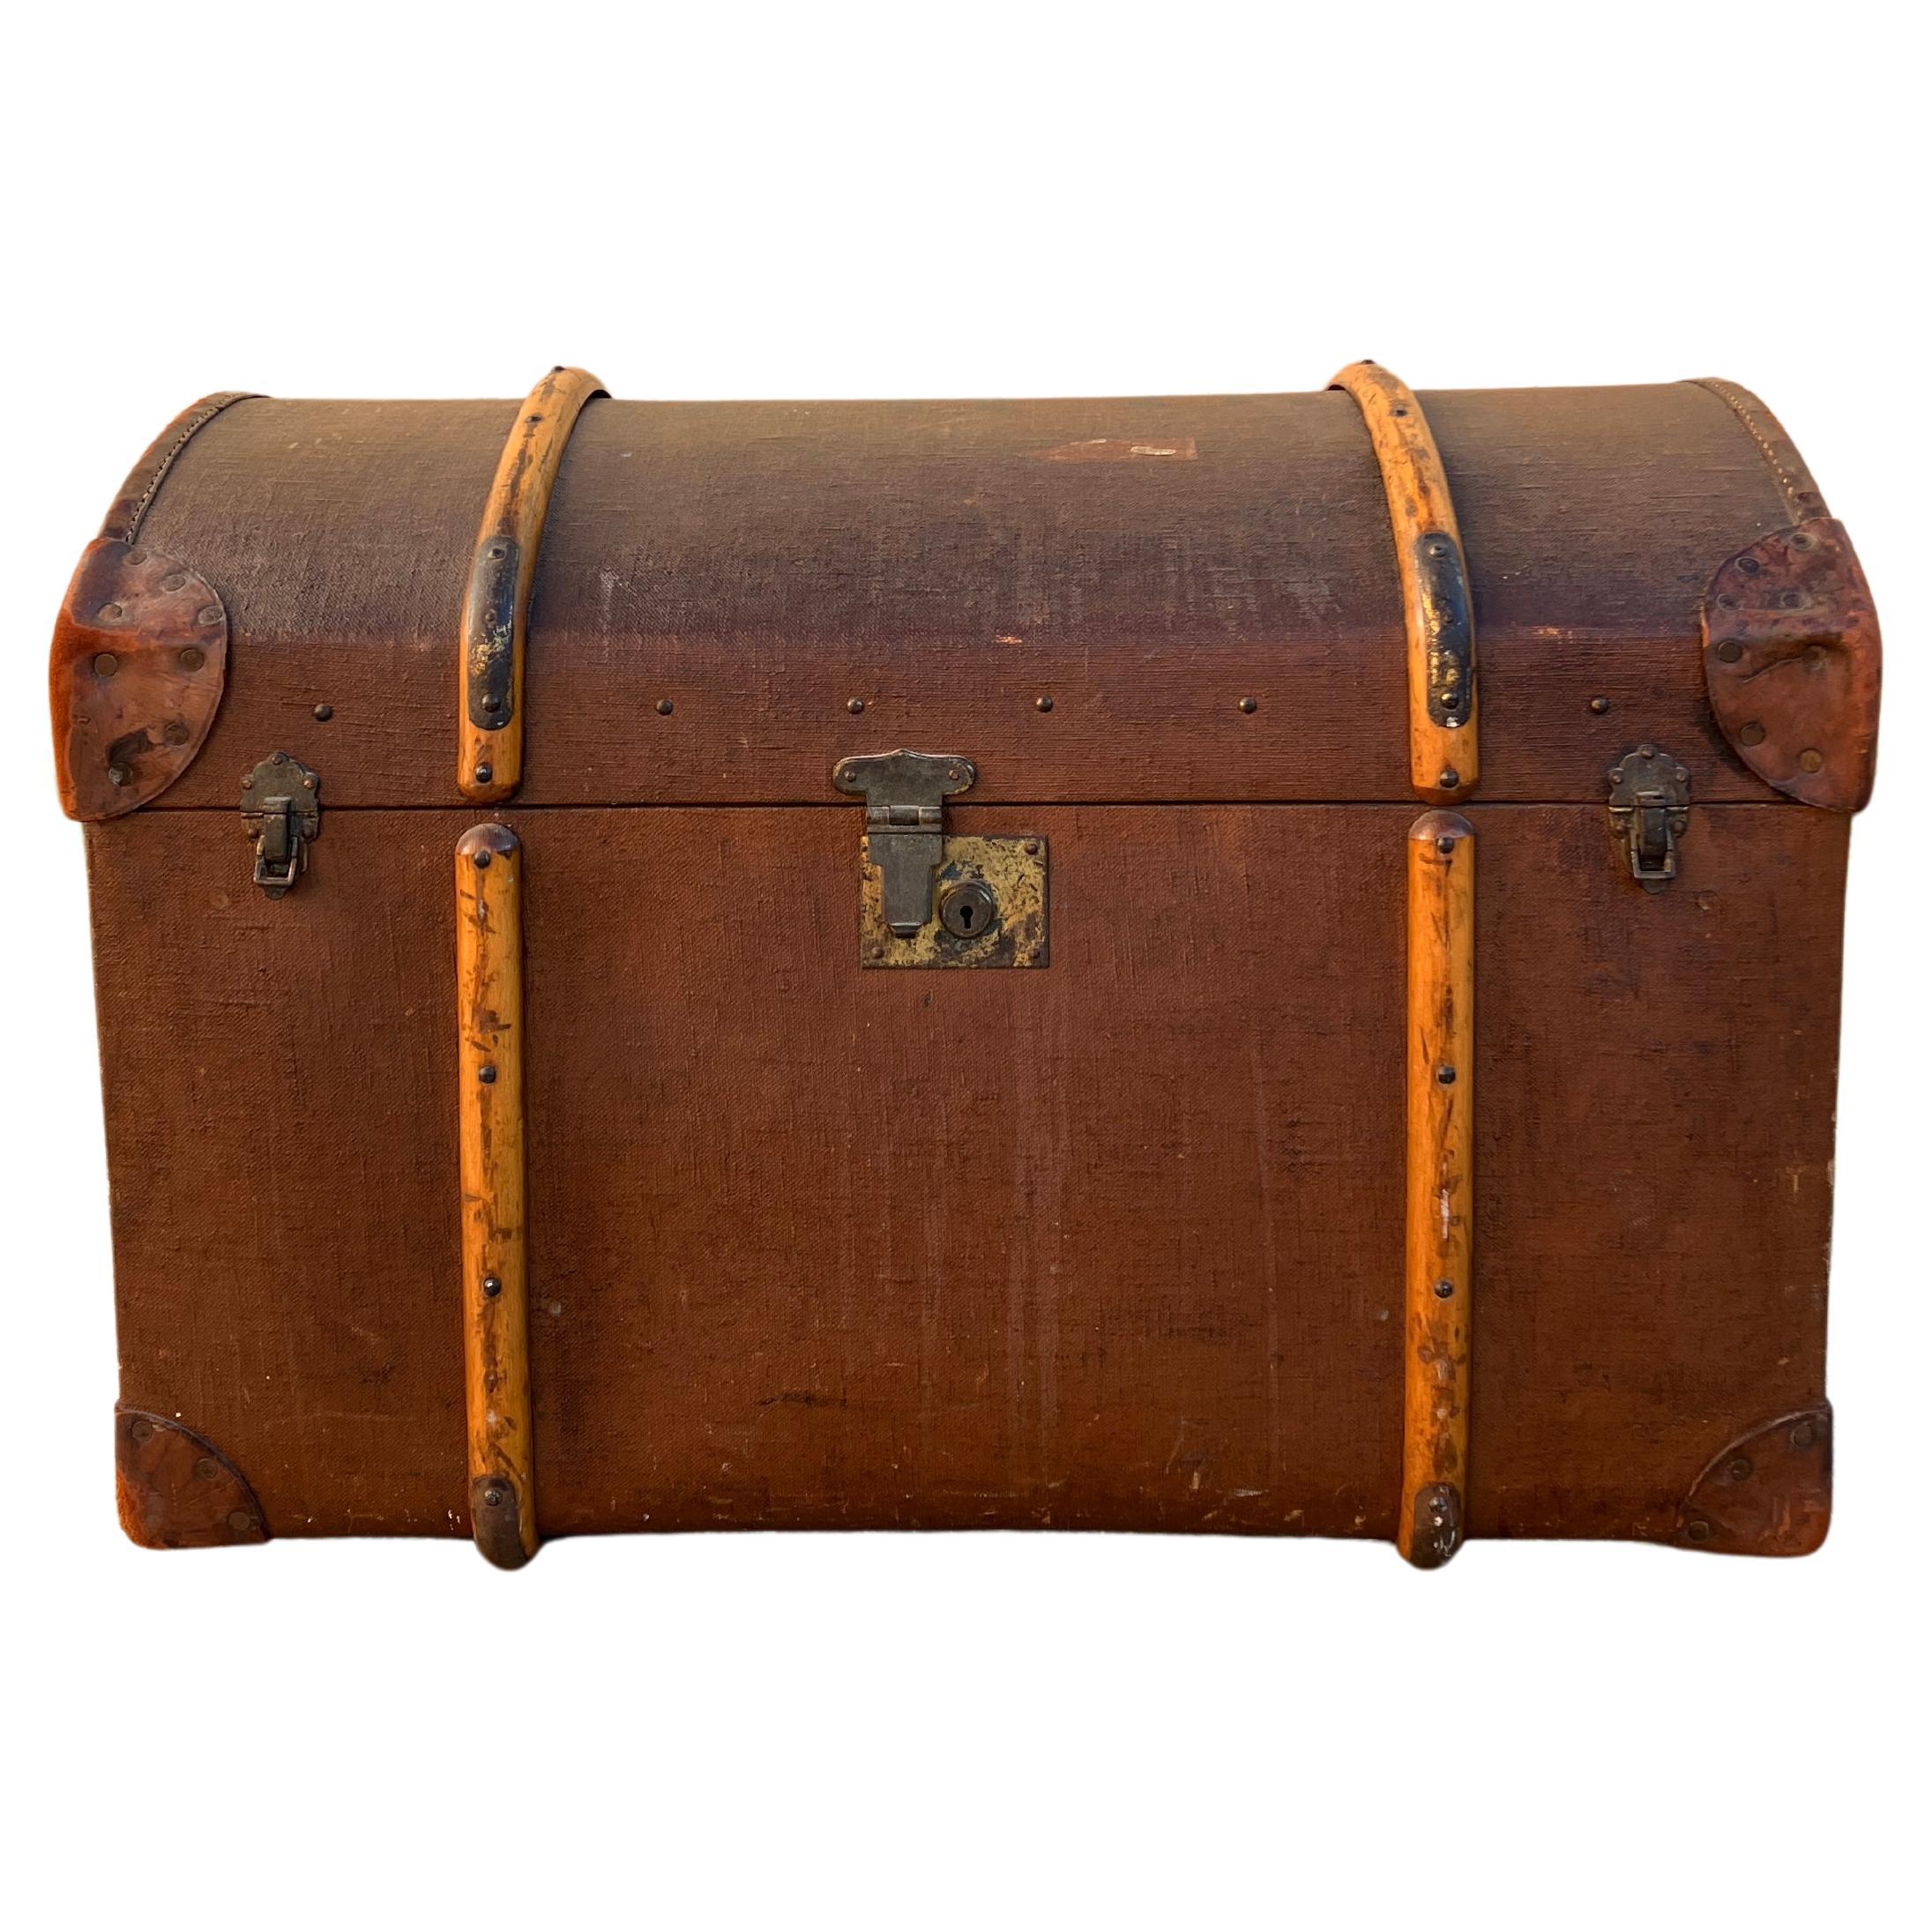 A gorgeous Victorian extra-large travel trunk. The antique trunk has an attractive dome top and is bound with wood. The handles on the sides are made of thick leather and are in great condition. The case has two side latches on the front and a large